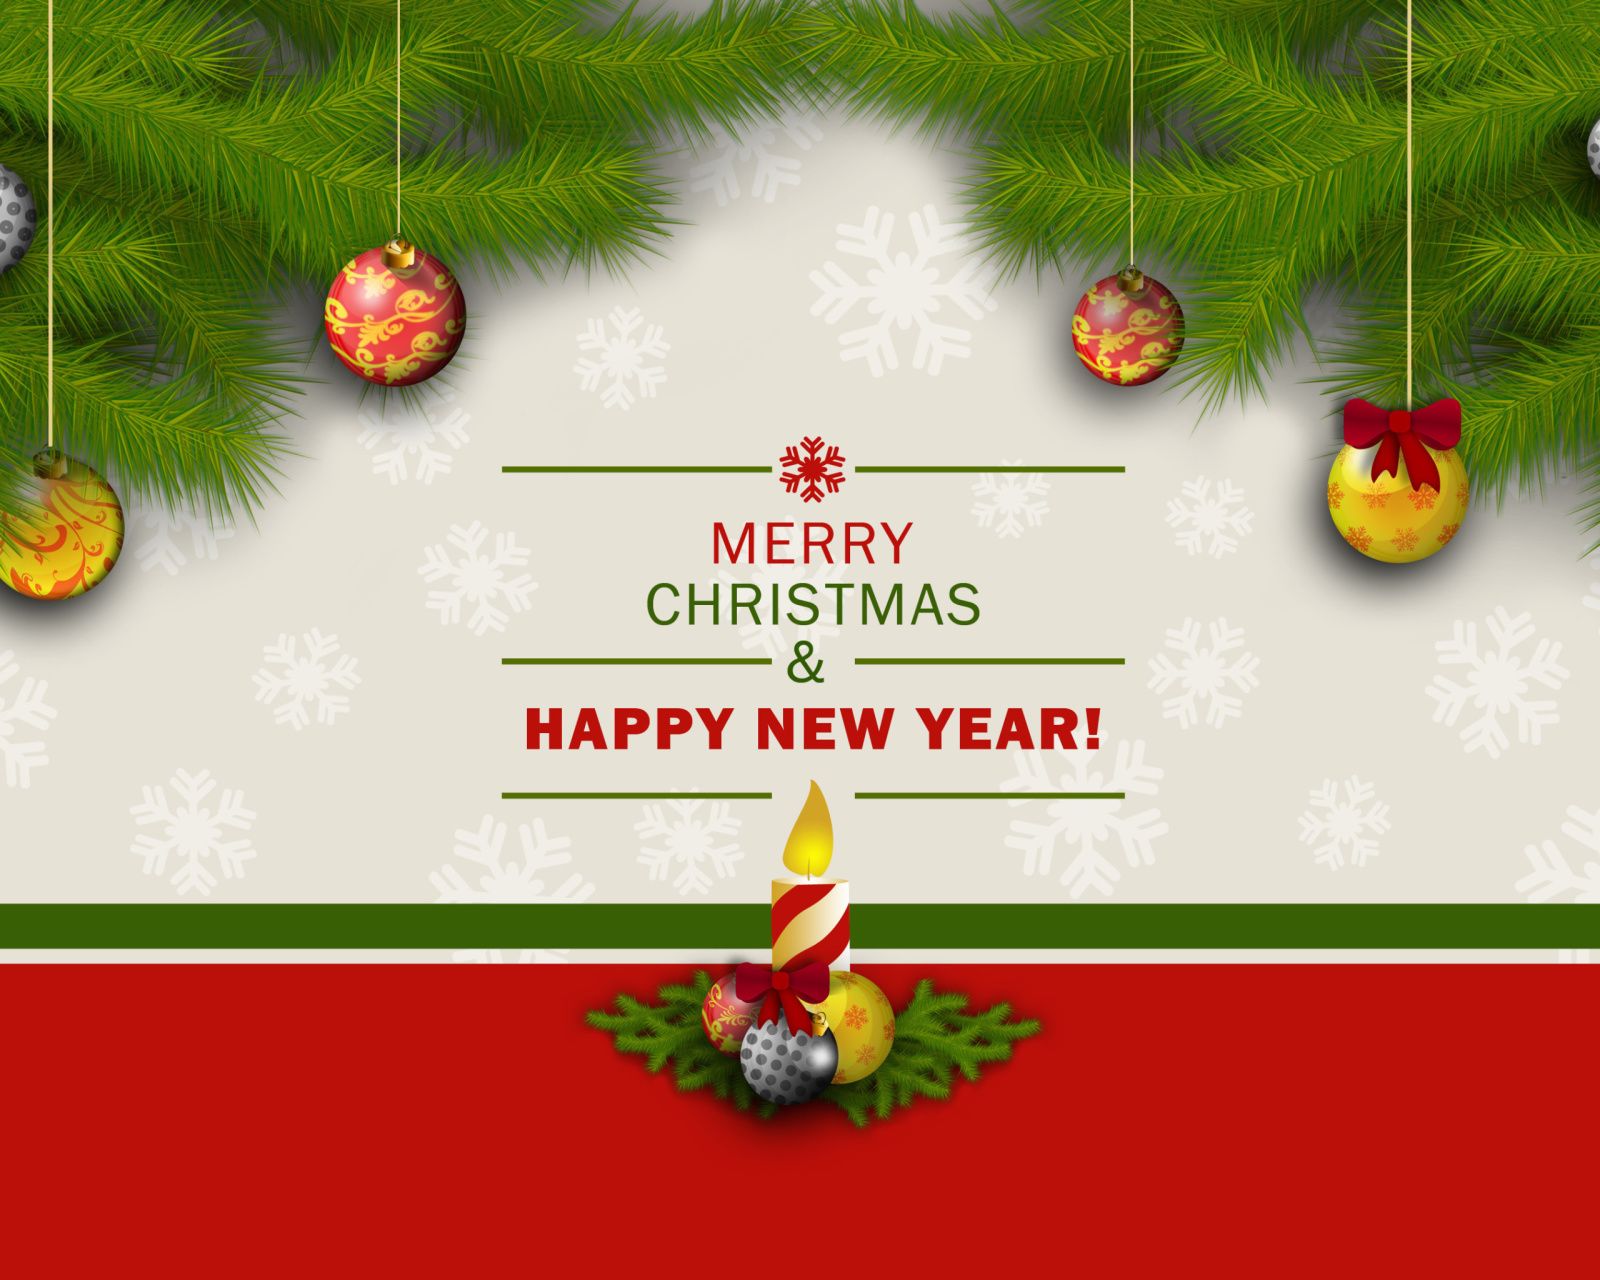 Merry Christmas and Happy New Year wallpaper 1600x1280